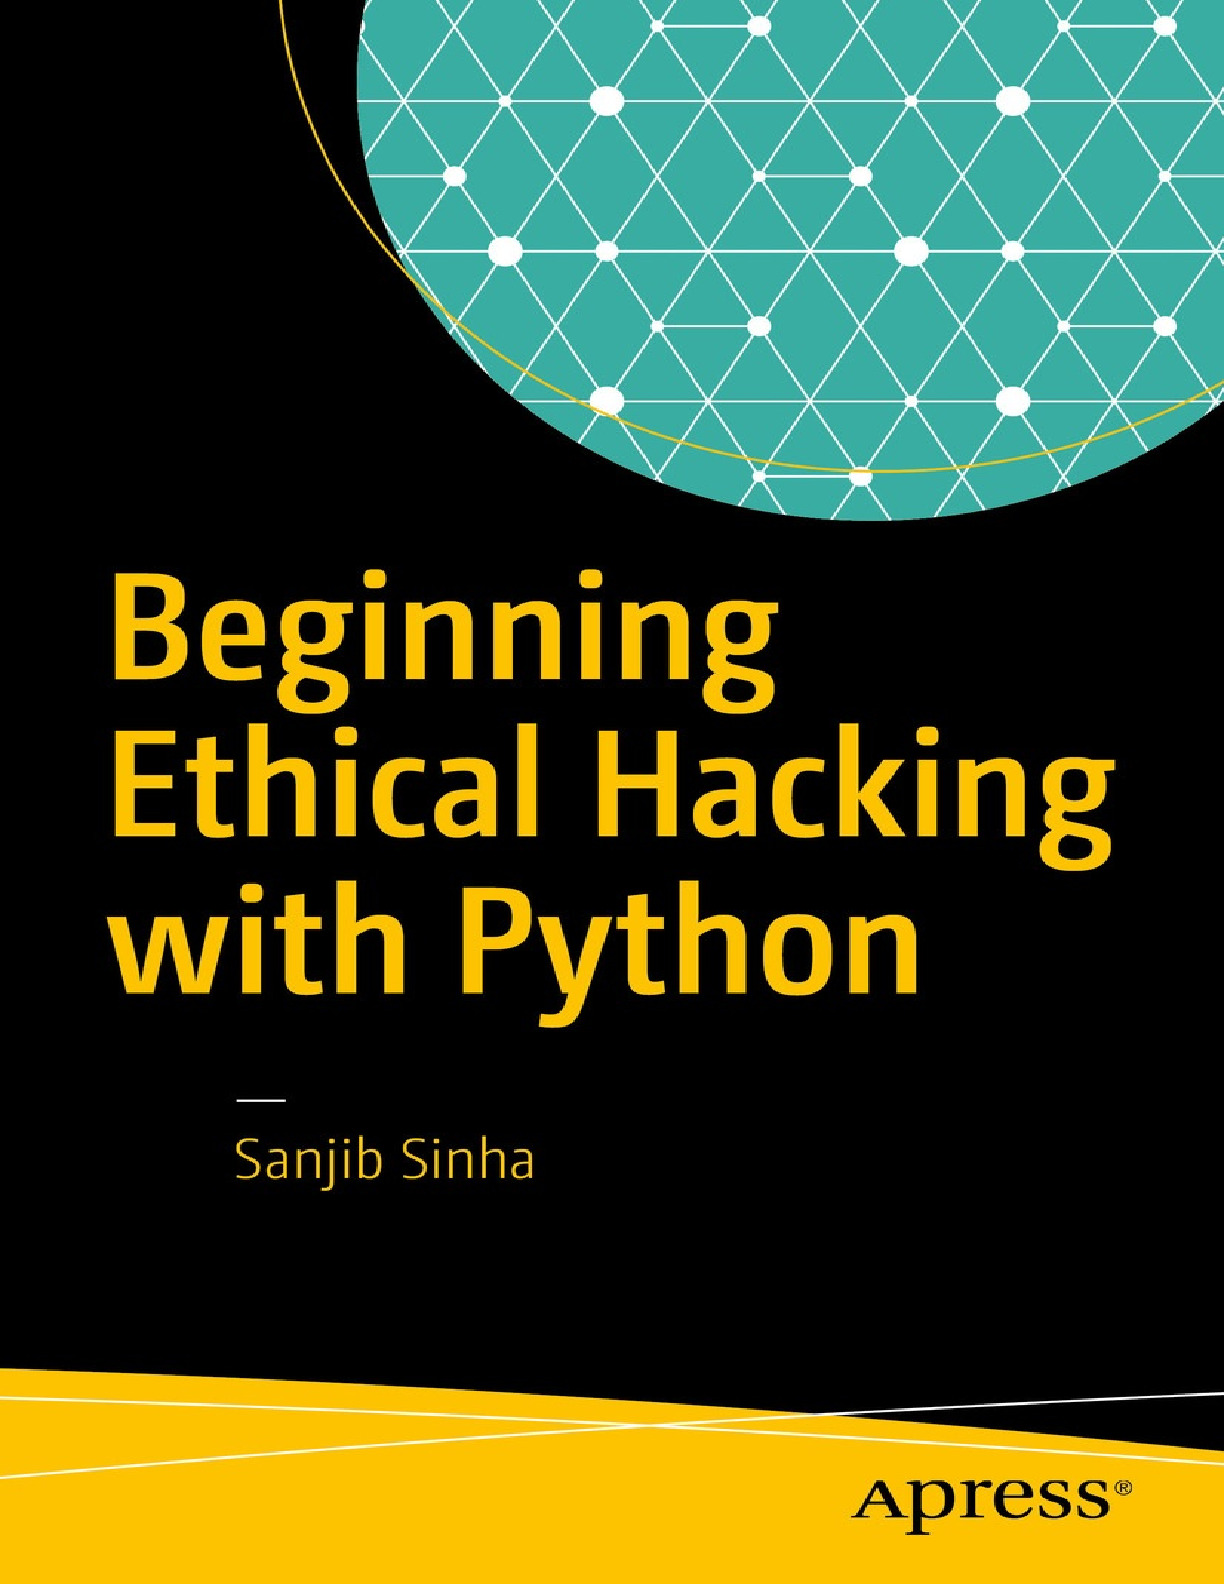 3. Begin Ethical Hacking with Python